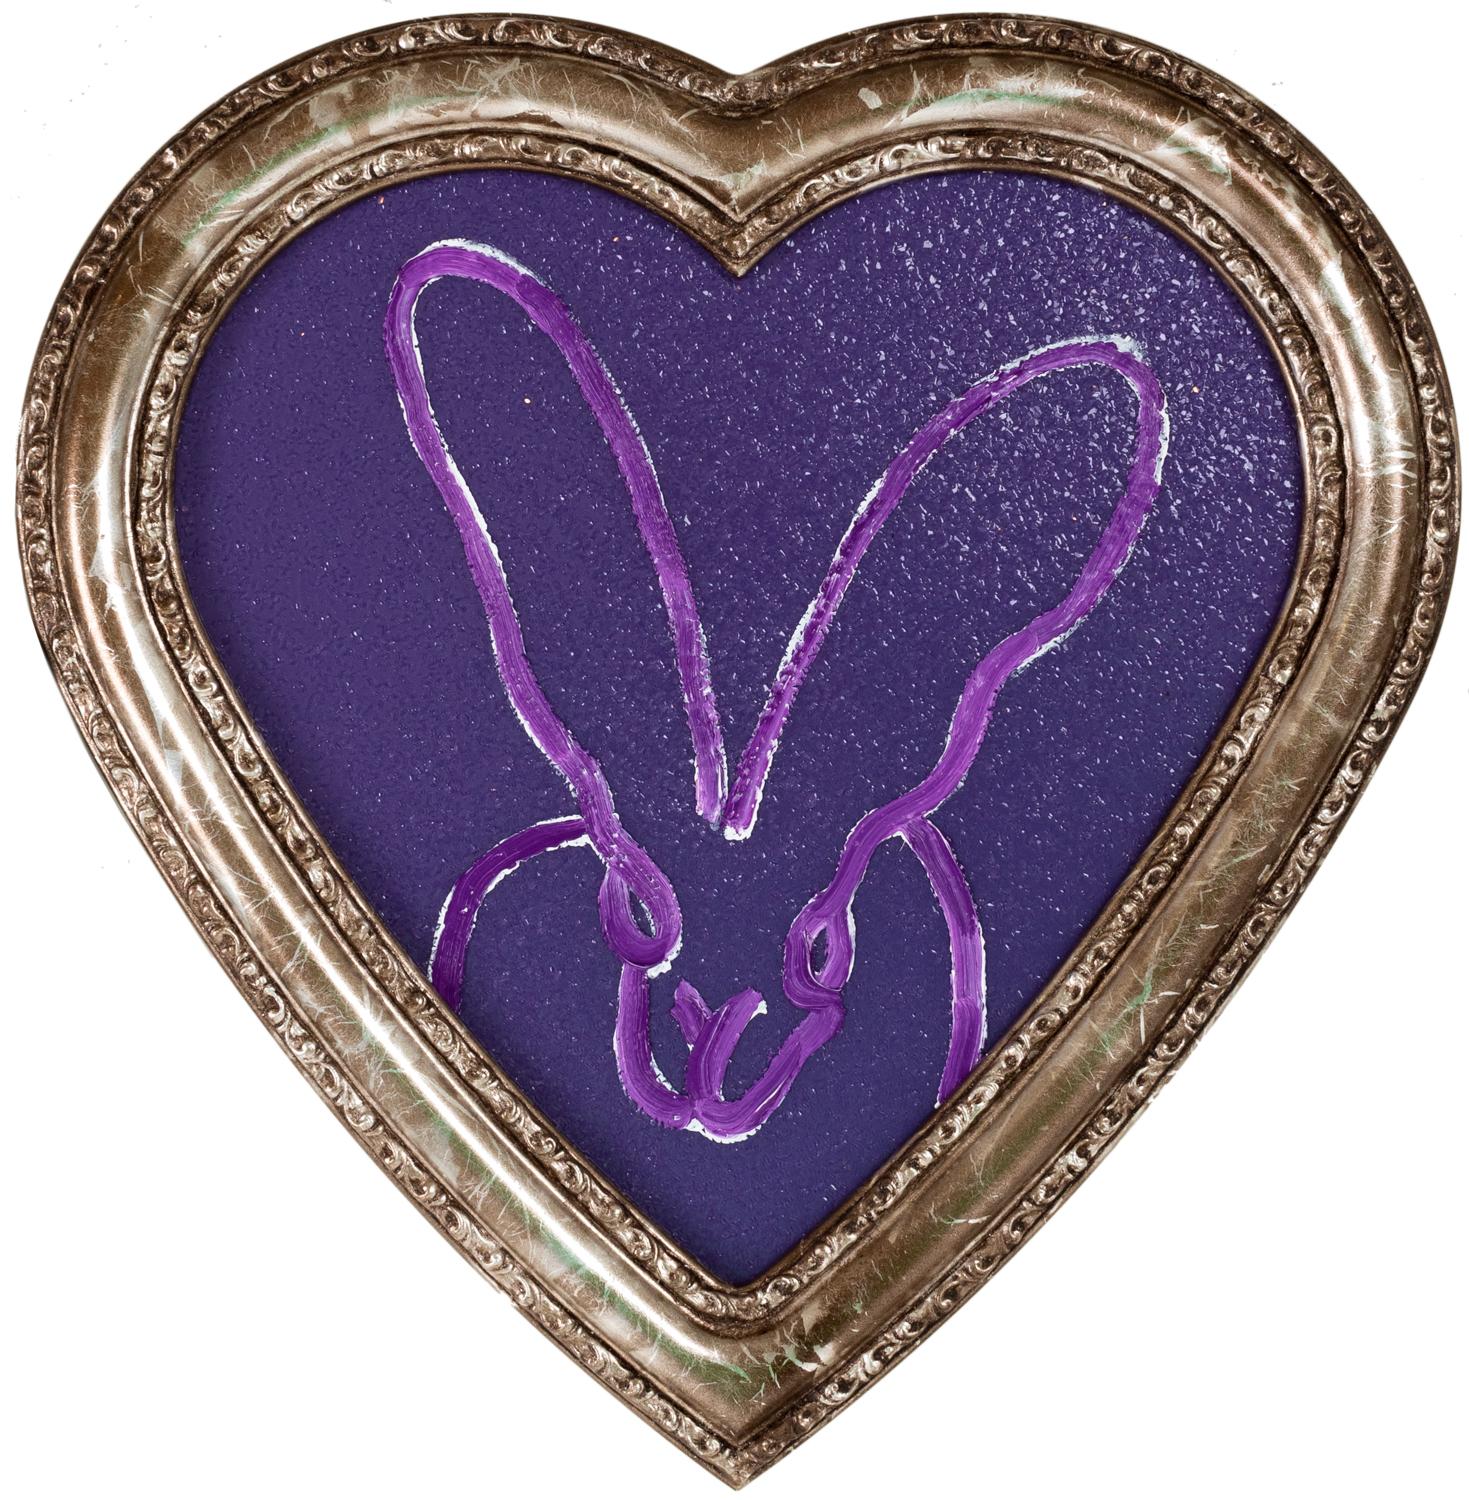 Hunt Slonem "Untitled" Outline Bunny, Purple Diamond Dust (Heart)
Purple outlined bunny on a purple diamond dust background in a custom heart-shaped frame

Unframed: 14 x 14 inches
Framed: 17.75 x 17.75 inches
*Painting is framed - Please note Hunt